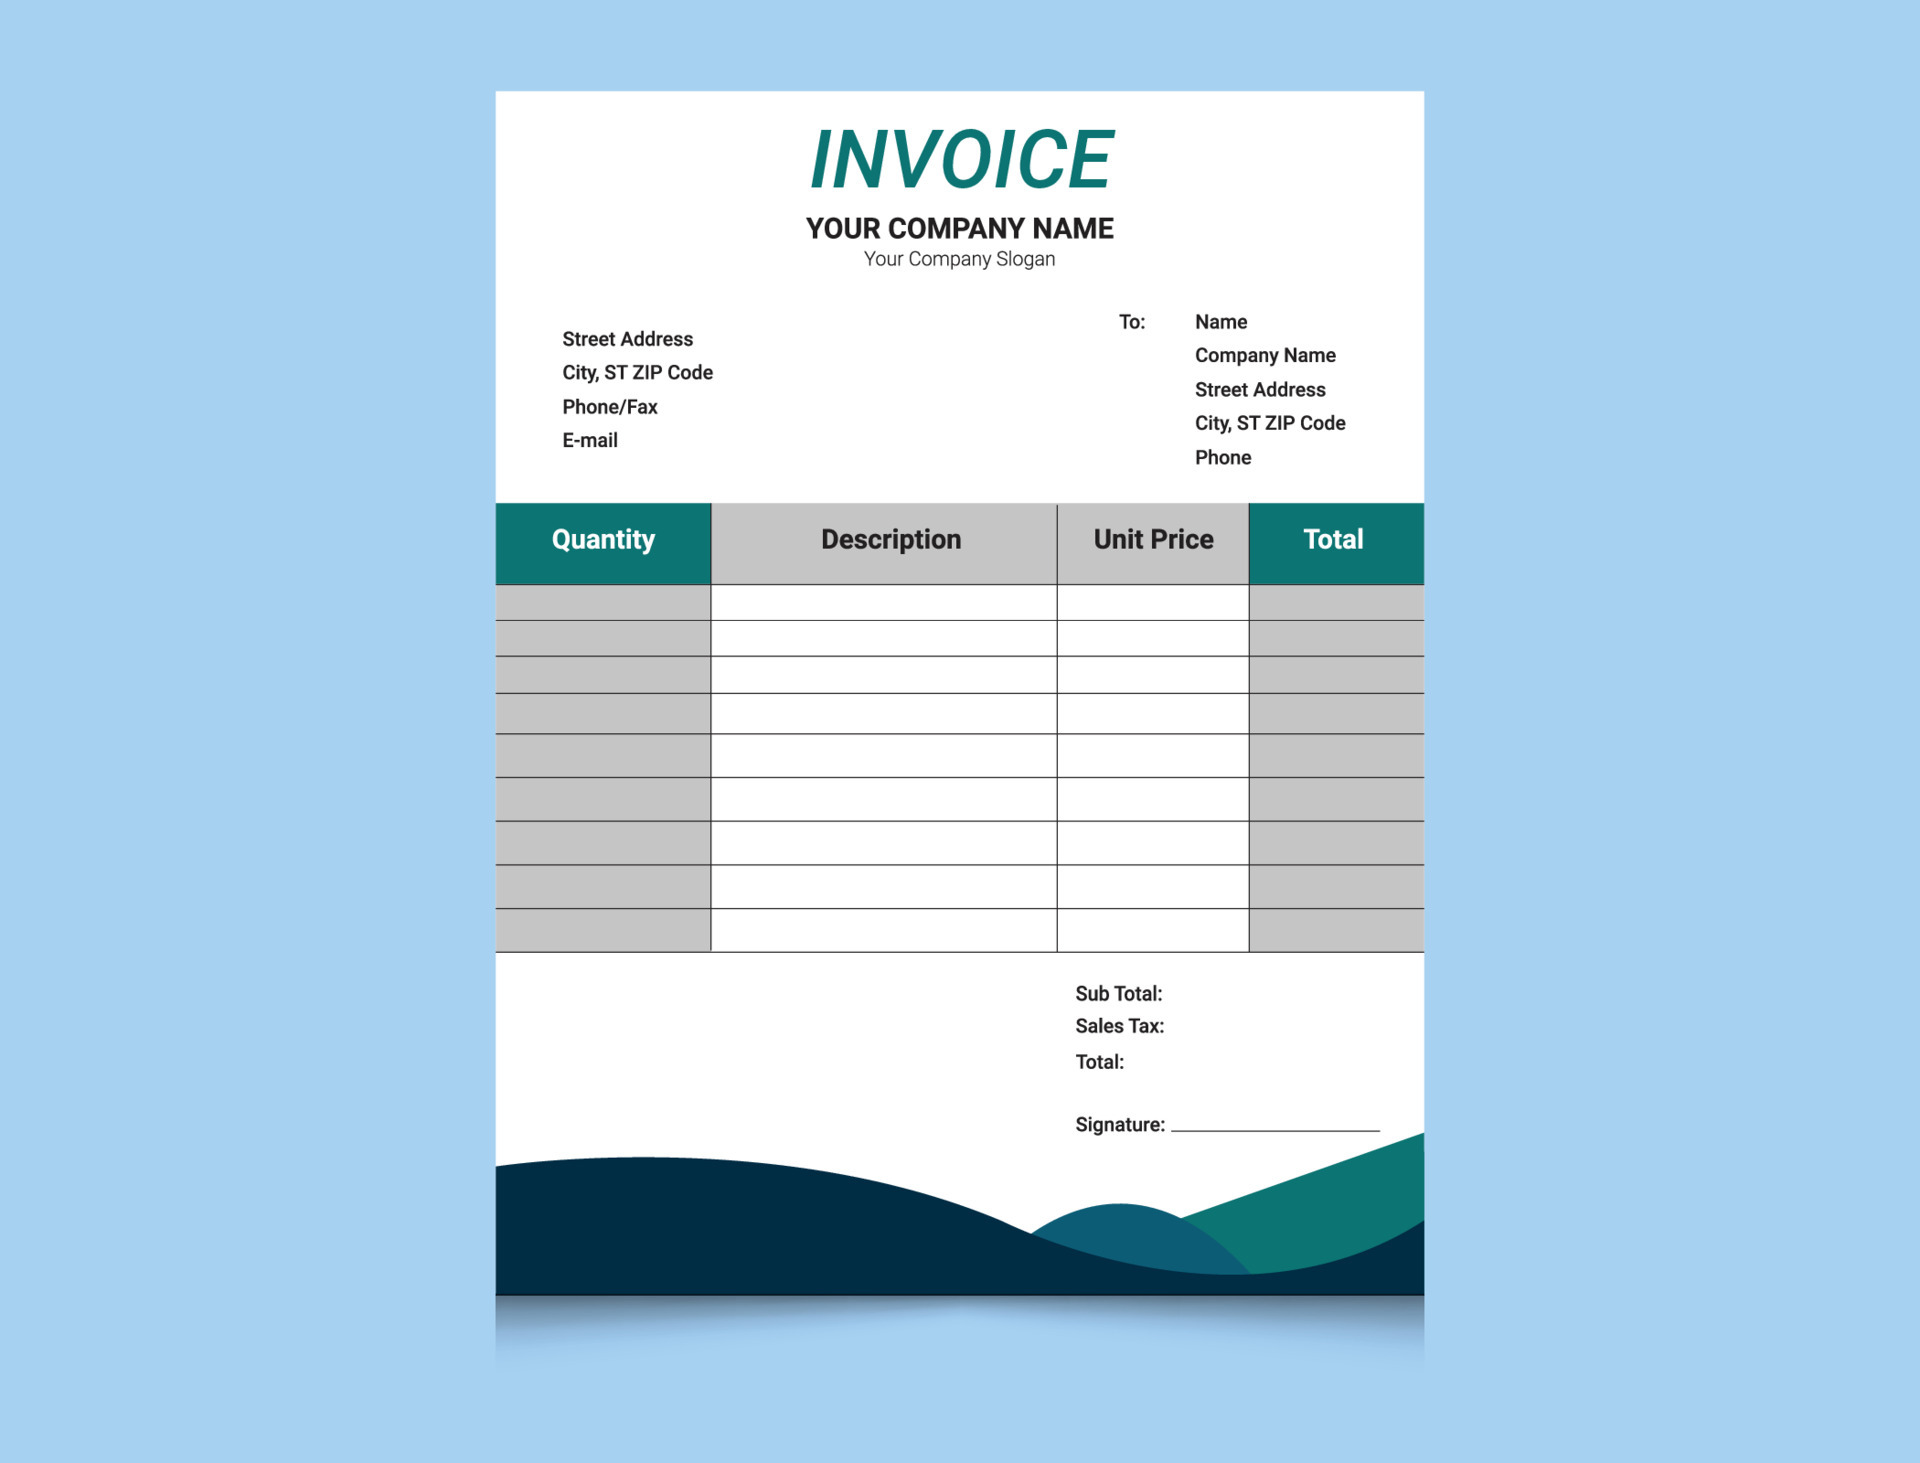 How and When to Create Proforma Invoices? A Detailed Guide